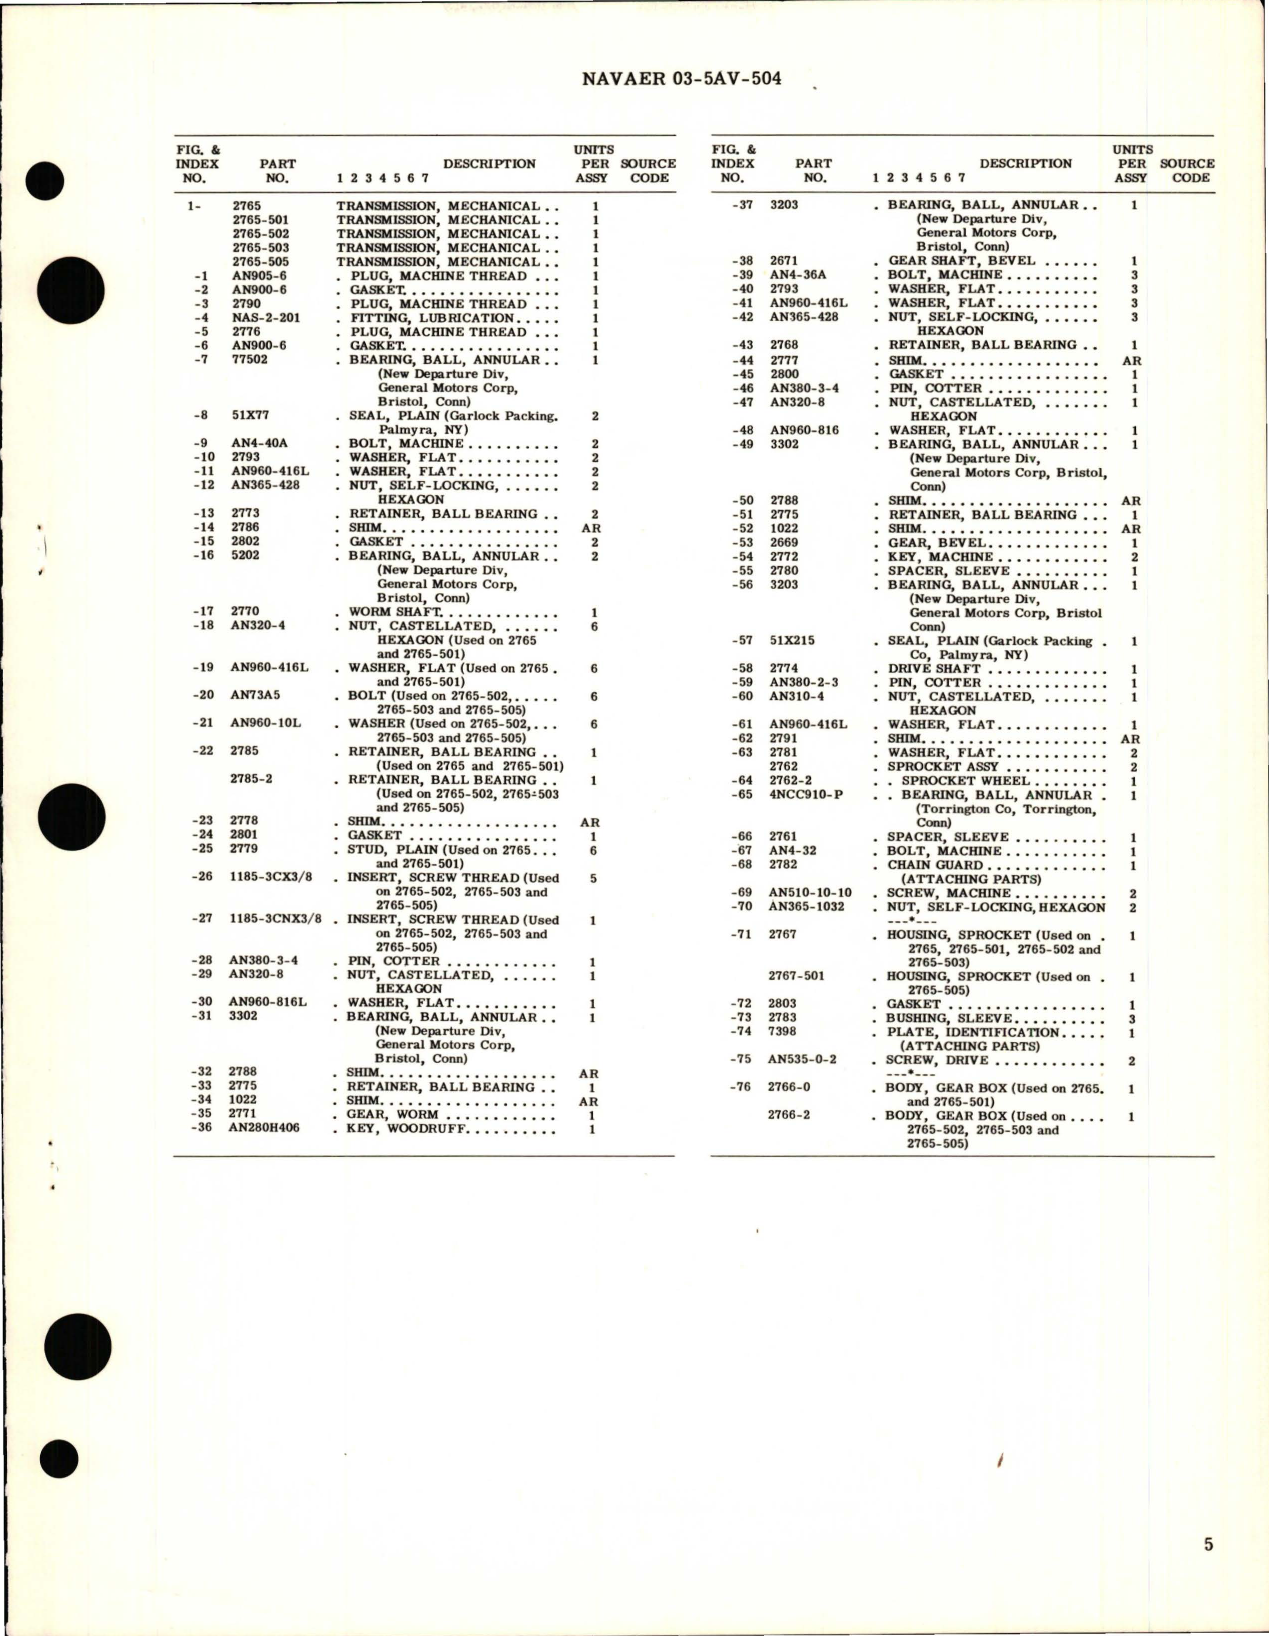 Sample page 5 from AirCorps Library document: Overhaul Instructions with Parts Breakdown for Manual Flap Transmission Assembly